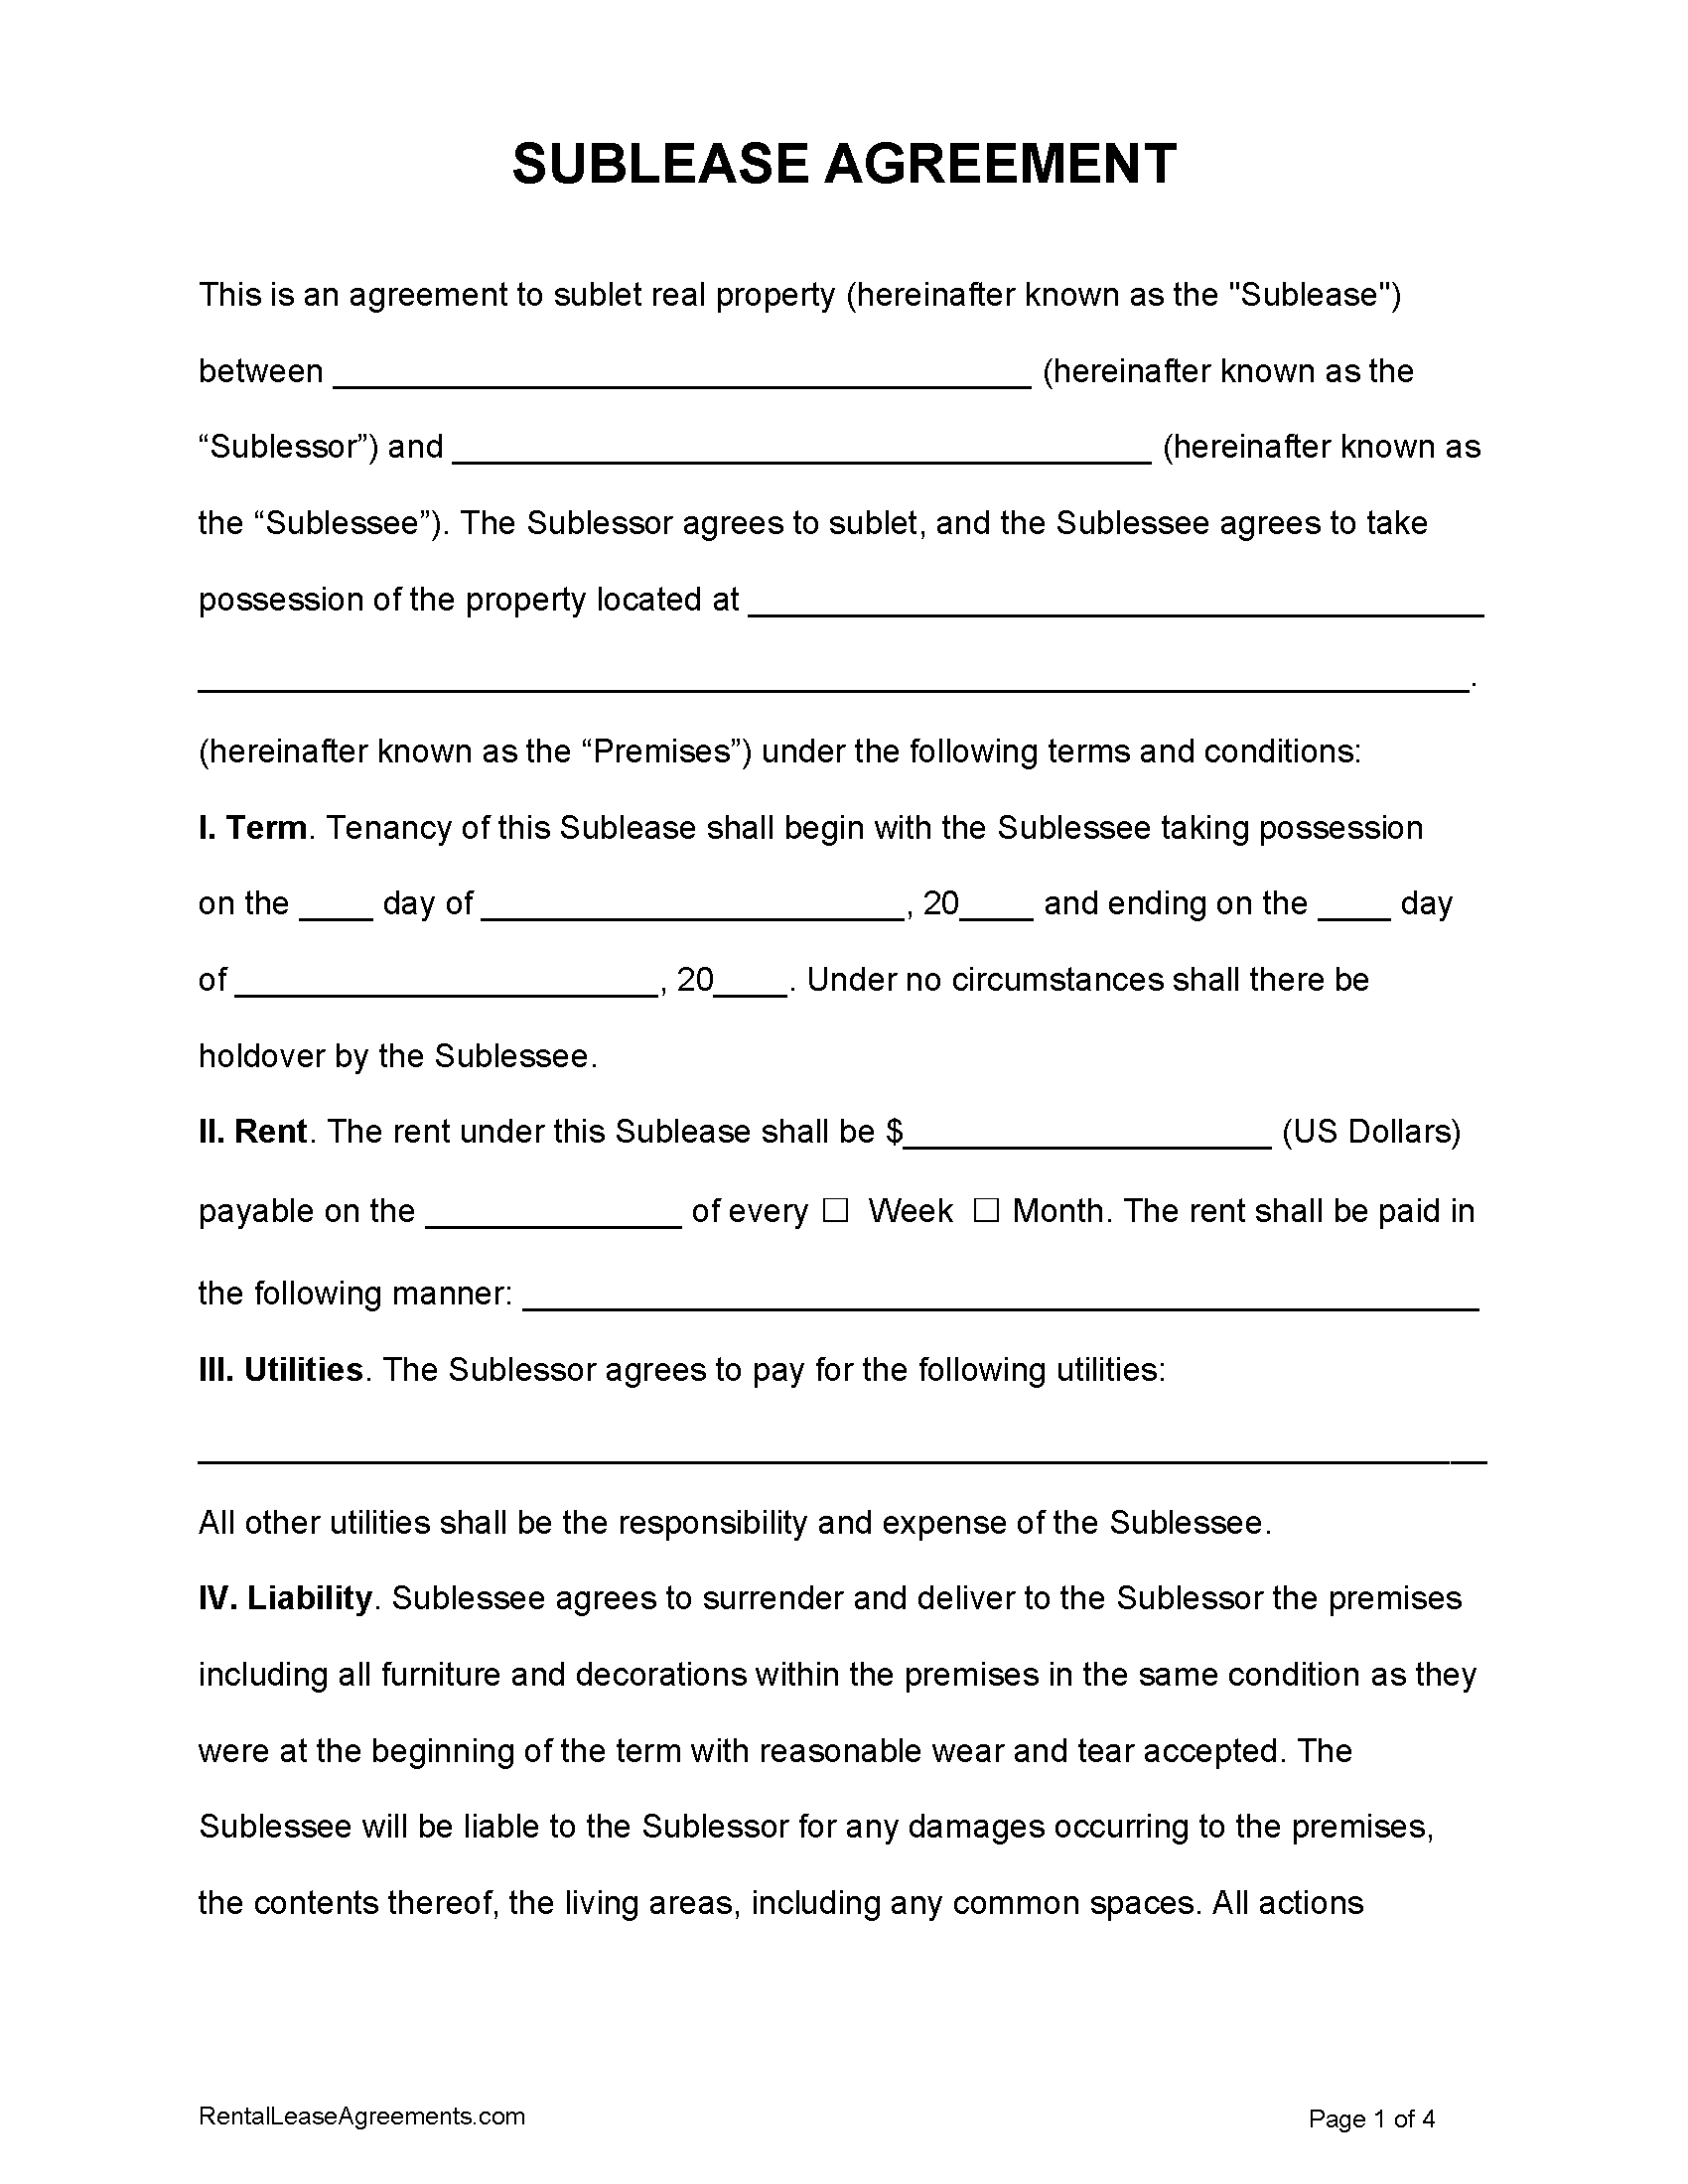 Free Sublease Agreement Template  PDF - Word